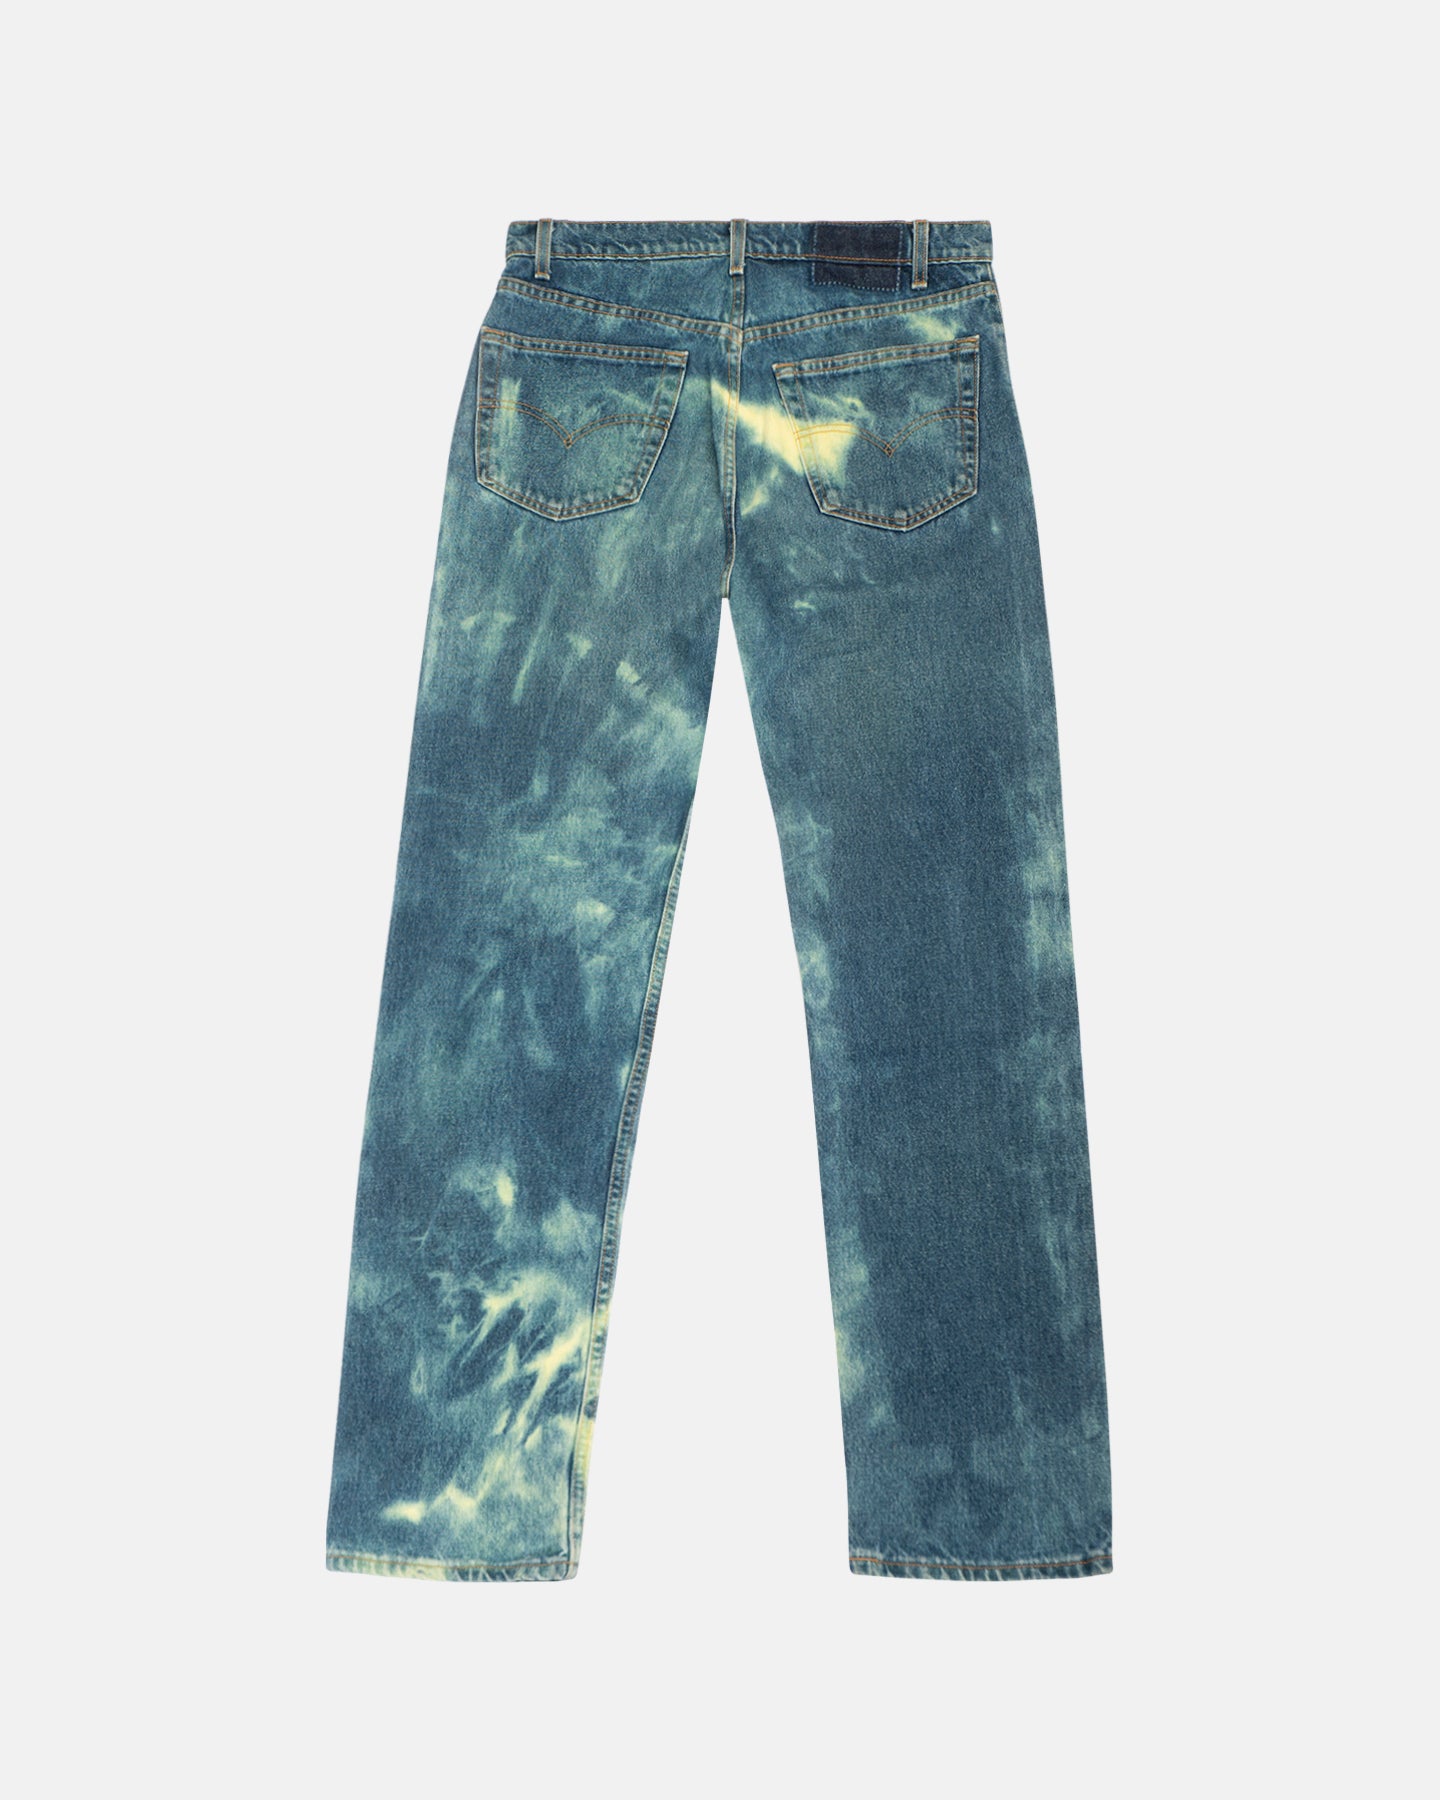 DB Decolorized Denim with Patches in Blue